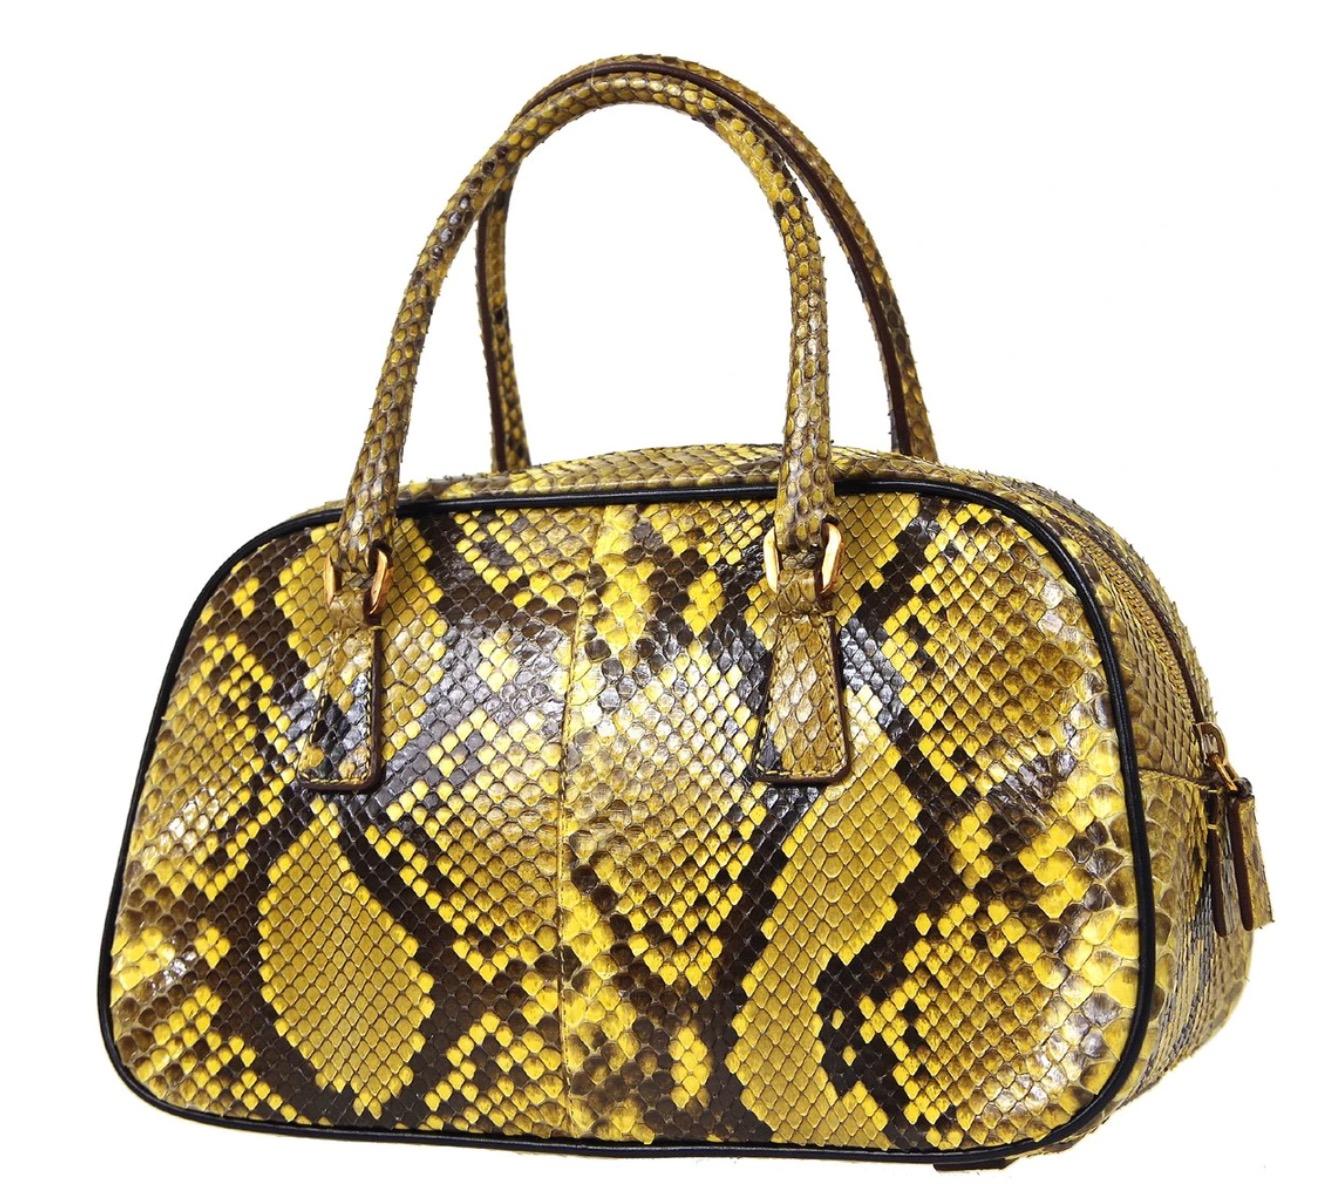 Python
Leather
Gold tone hardware
Zipper closure
Satin lining
Made in Italy
Handle drop 3